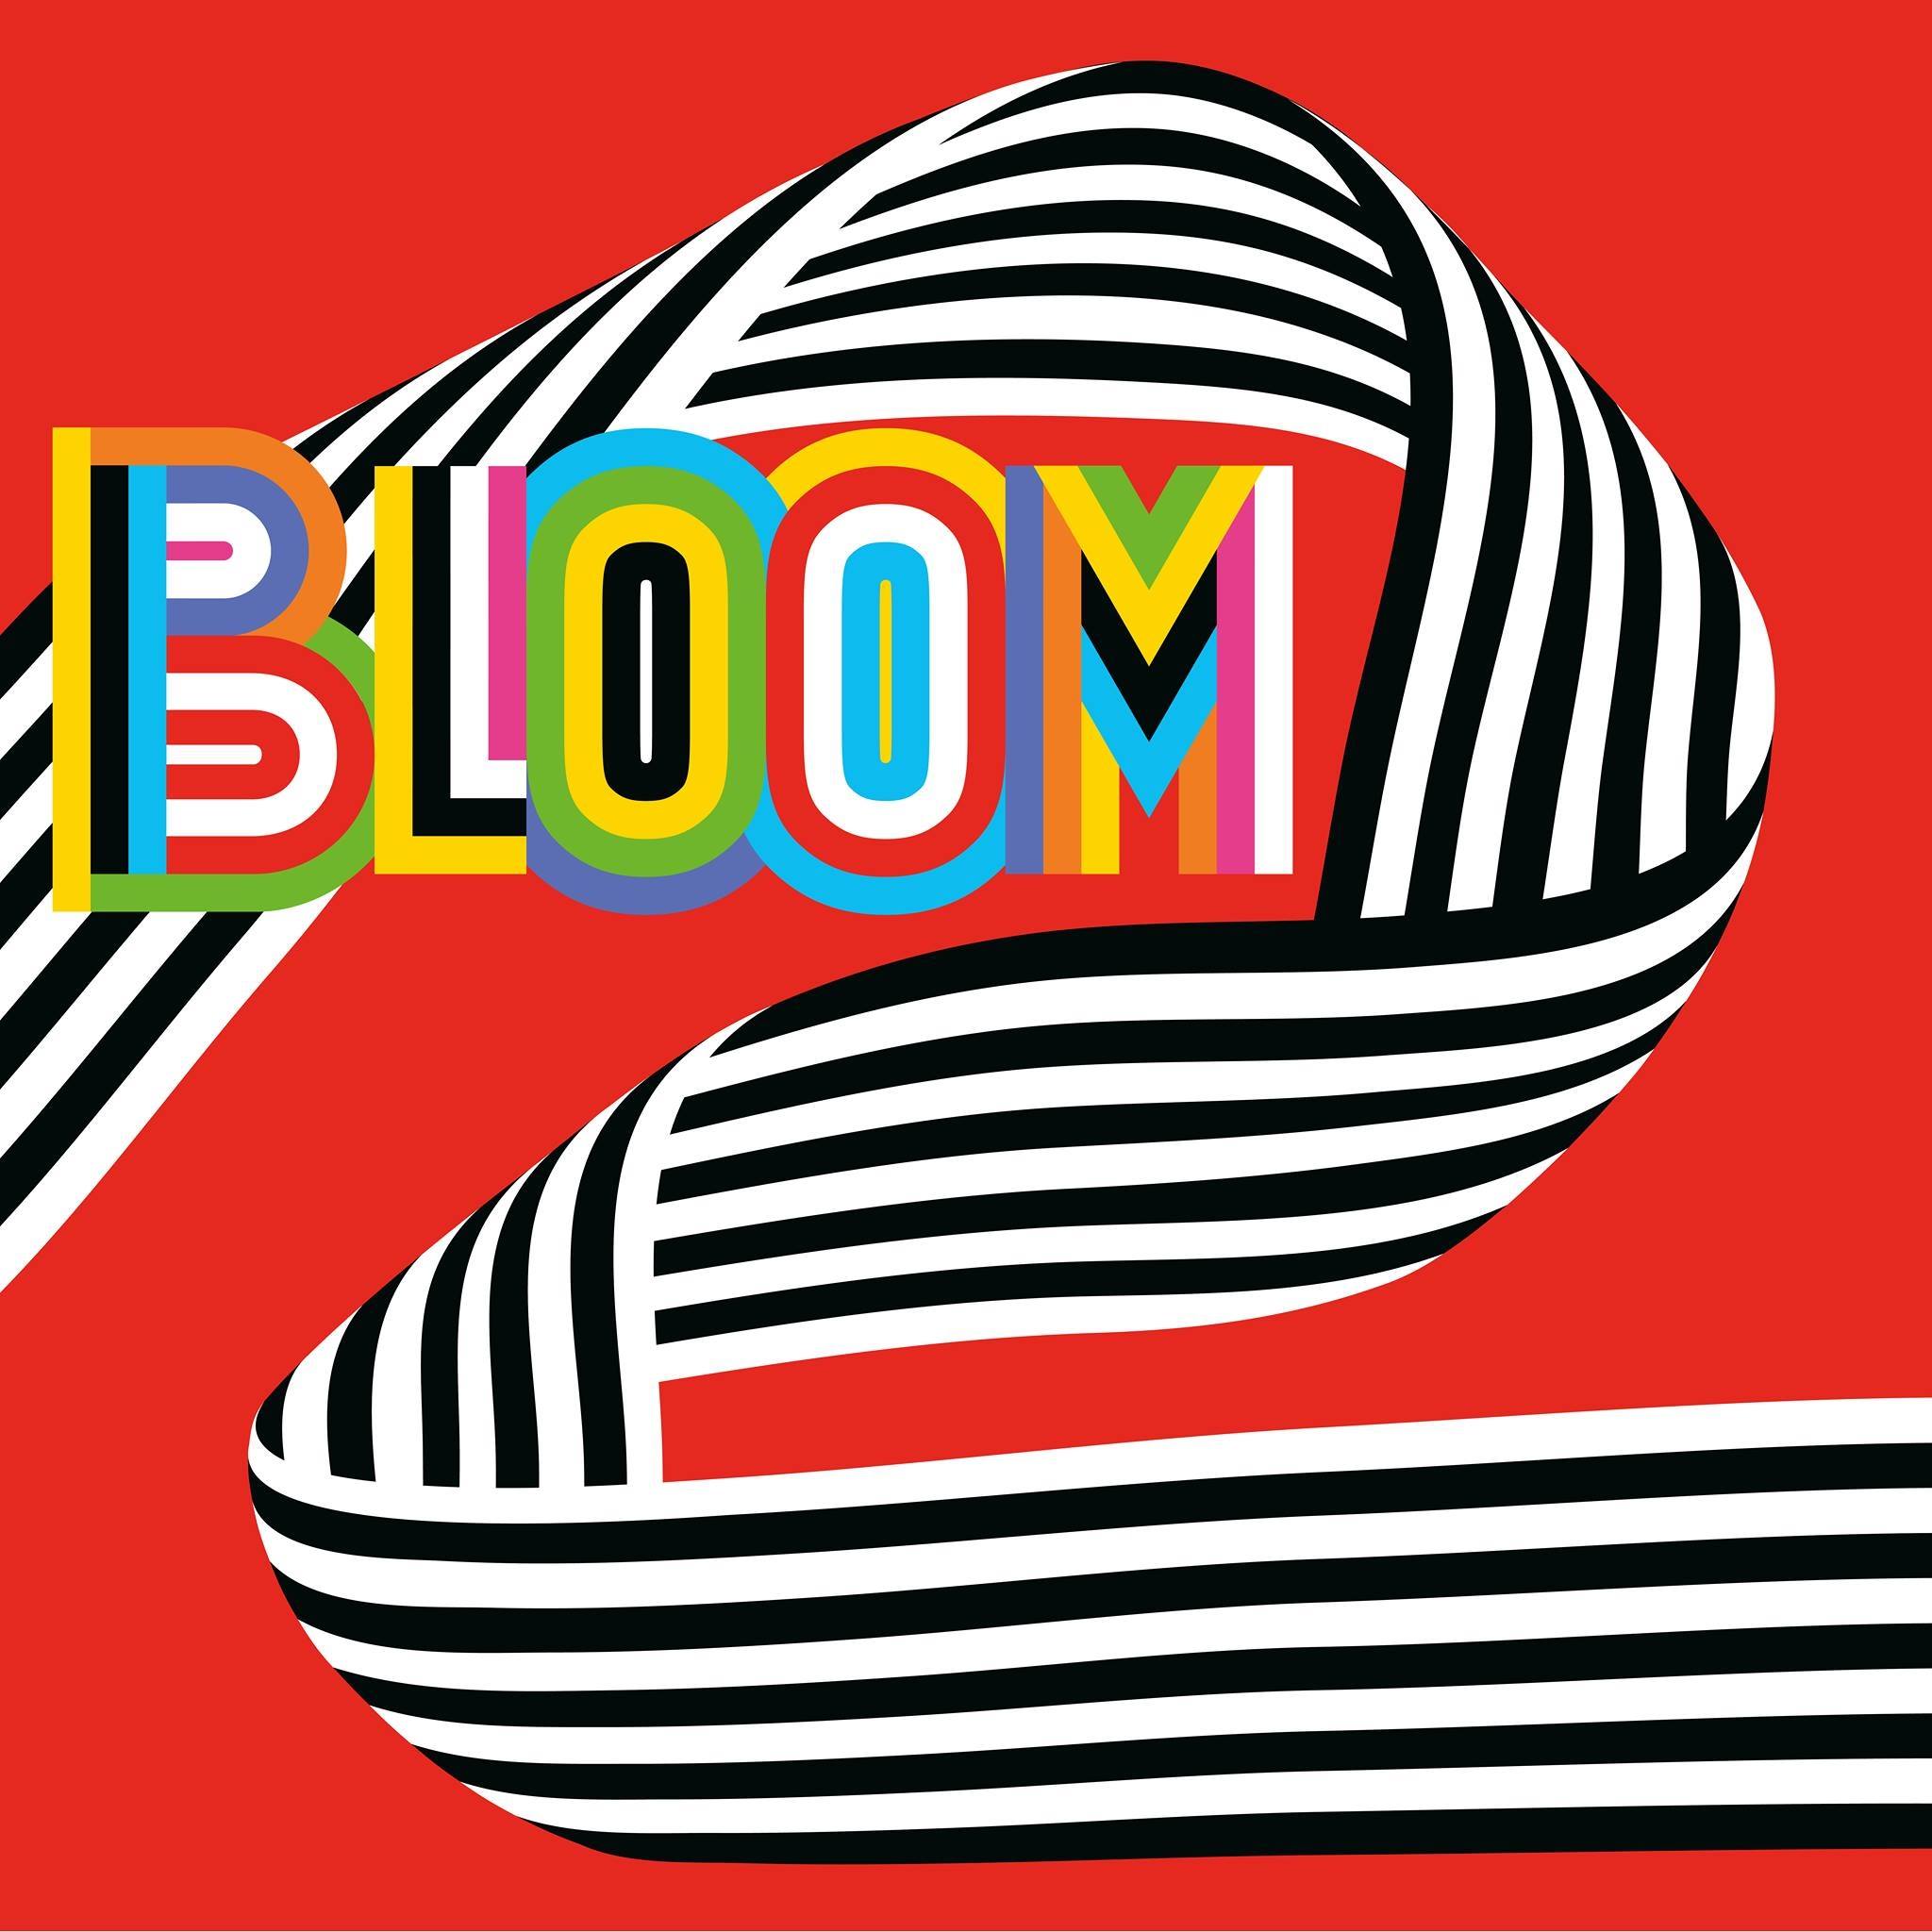 LOCAL ACTS AT BLOOM 2